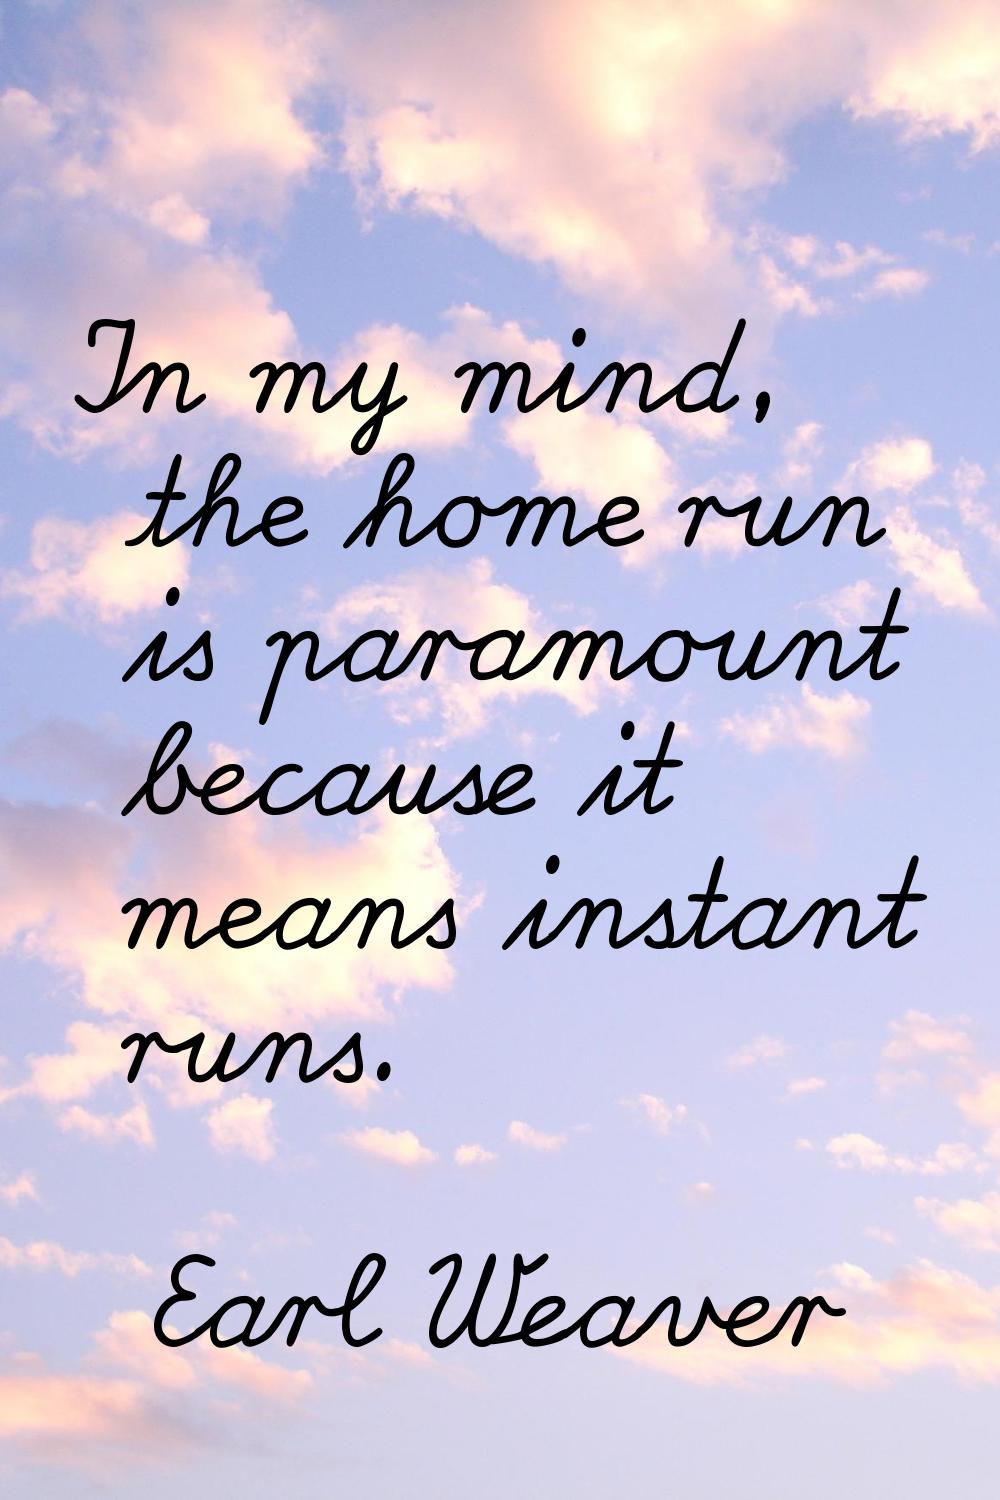 In my mind, the home run is paramount because it means instant runs.